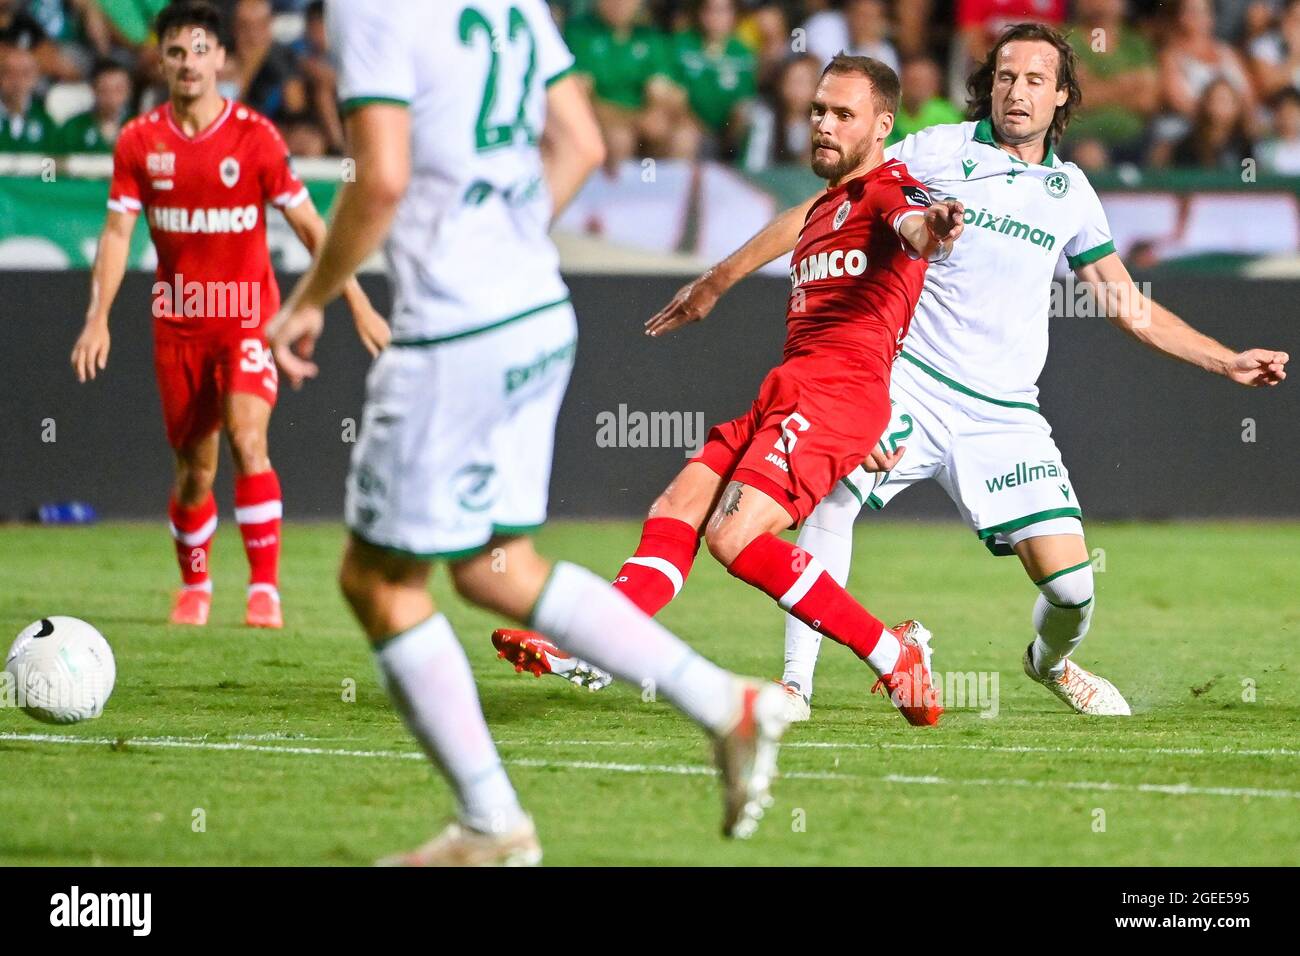 Antwerp's Birger Verstraete and Omonoia's Mikkel Diskerud fight for the ball during the match between Belgian soccer team Royal Antwerp FC and Omonia Stock Photo